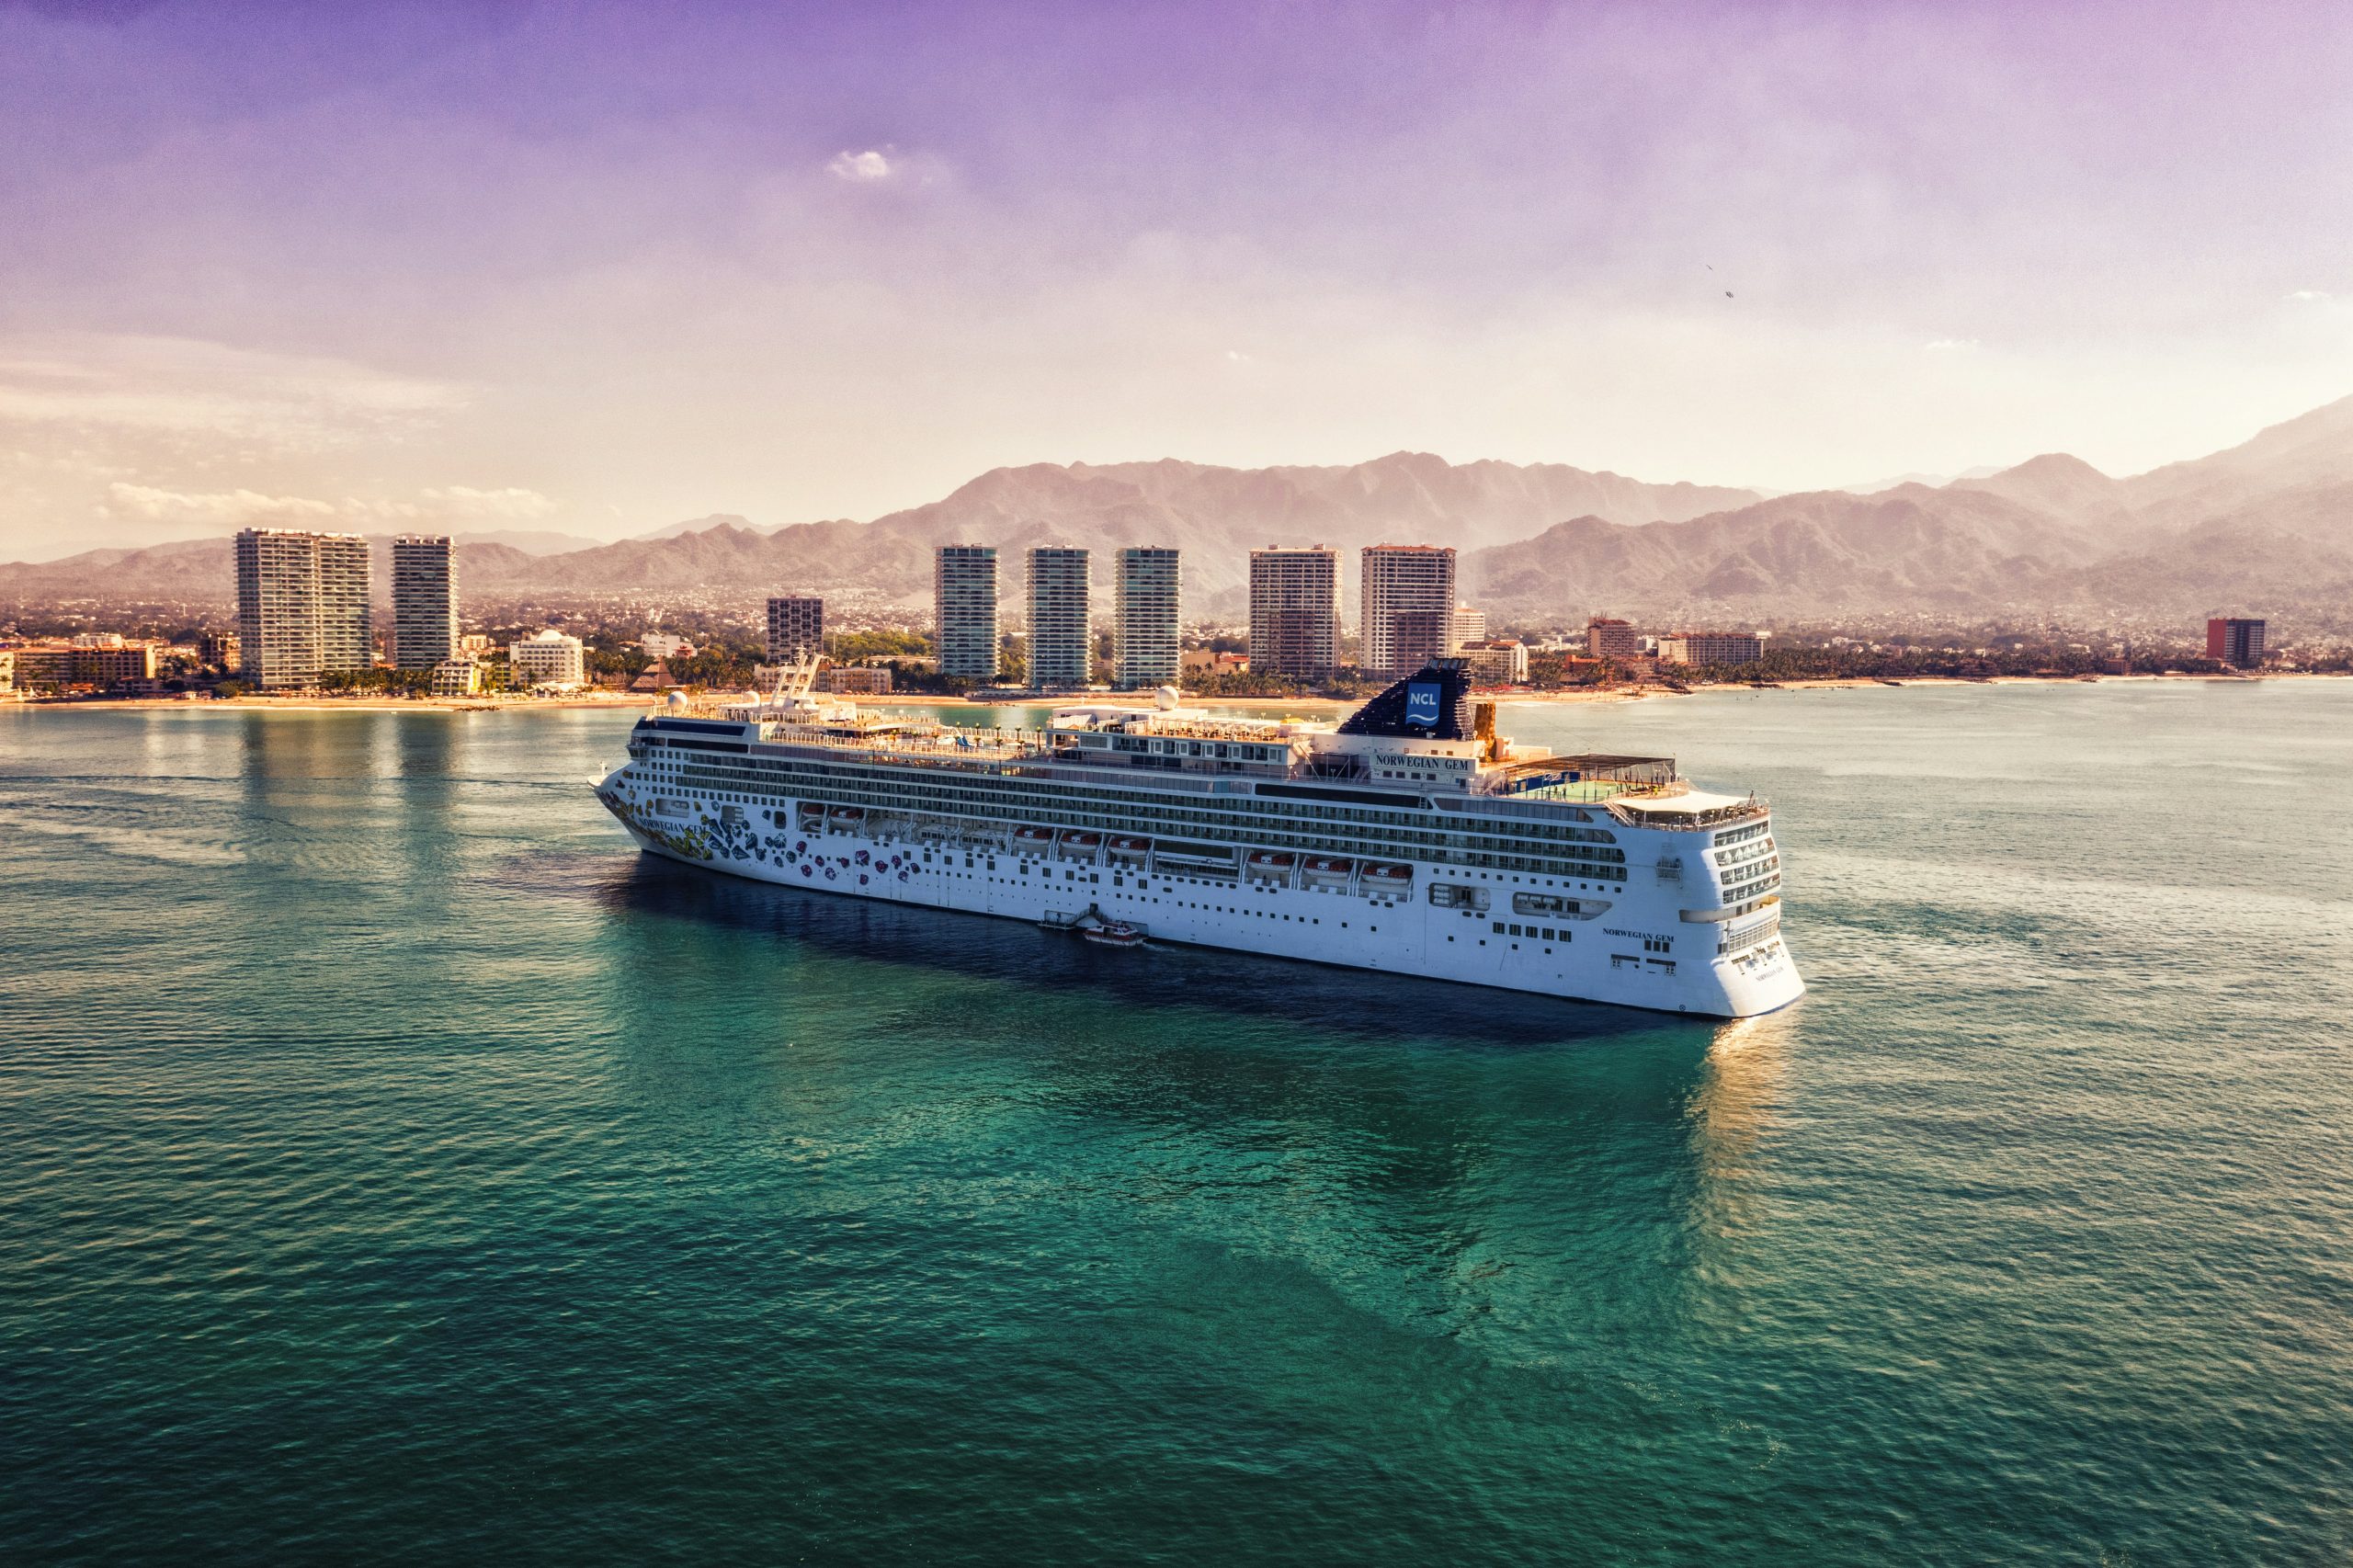 explore a variety of cruise options for your next adventure. from luxury liners to budget-friendly voyages, find the perfect cruise for you.